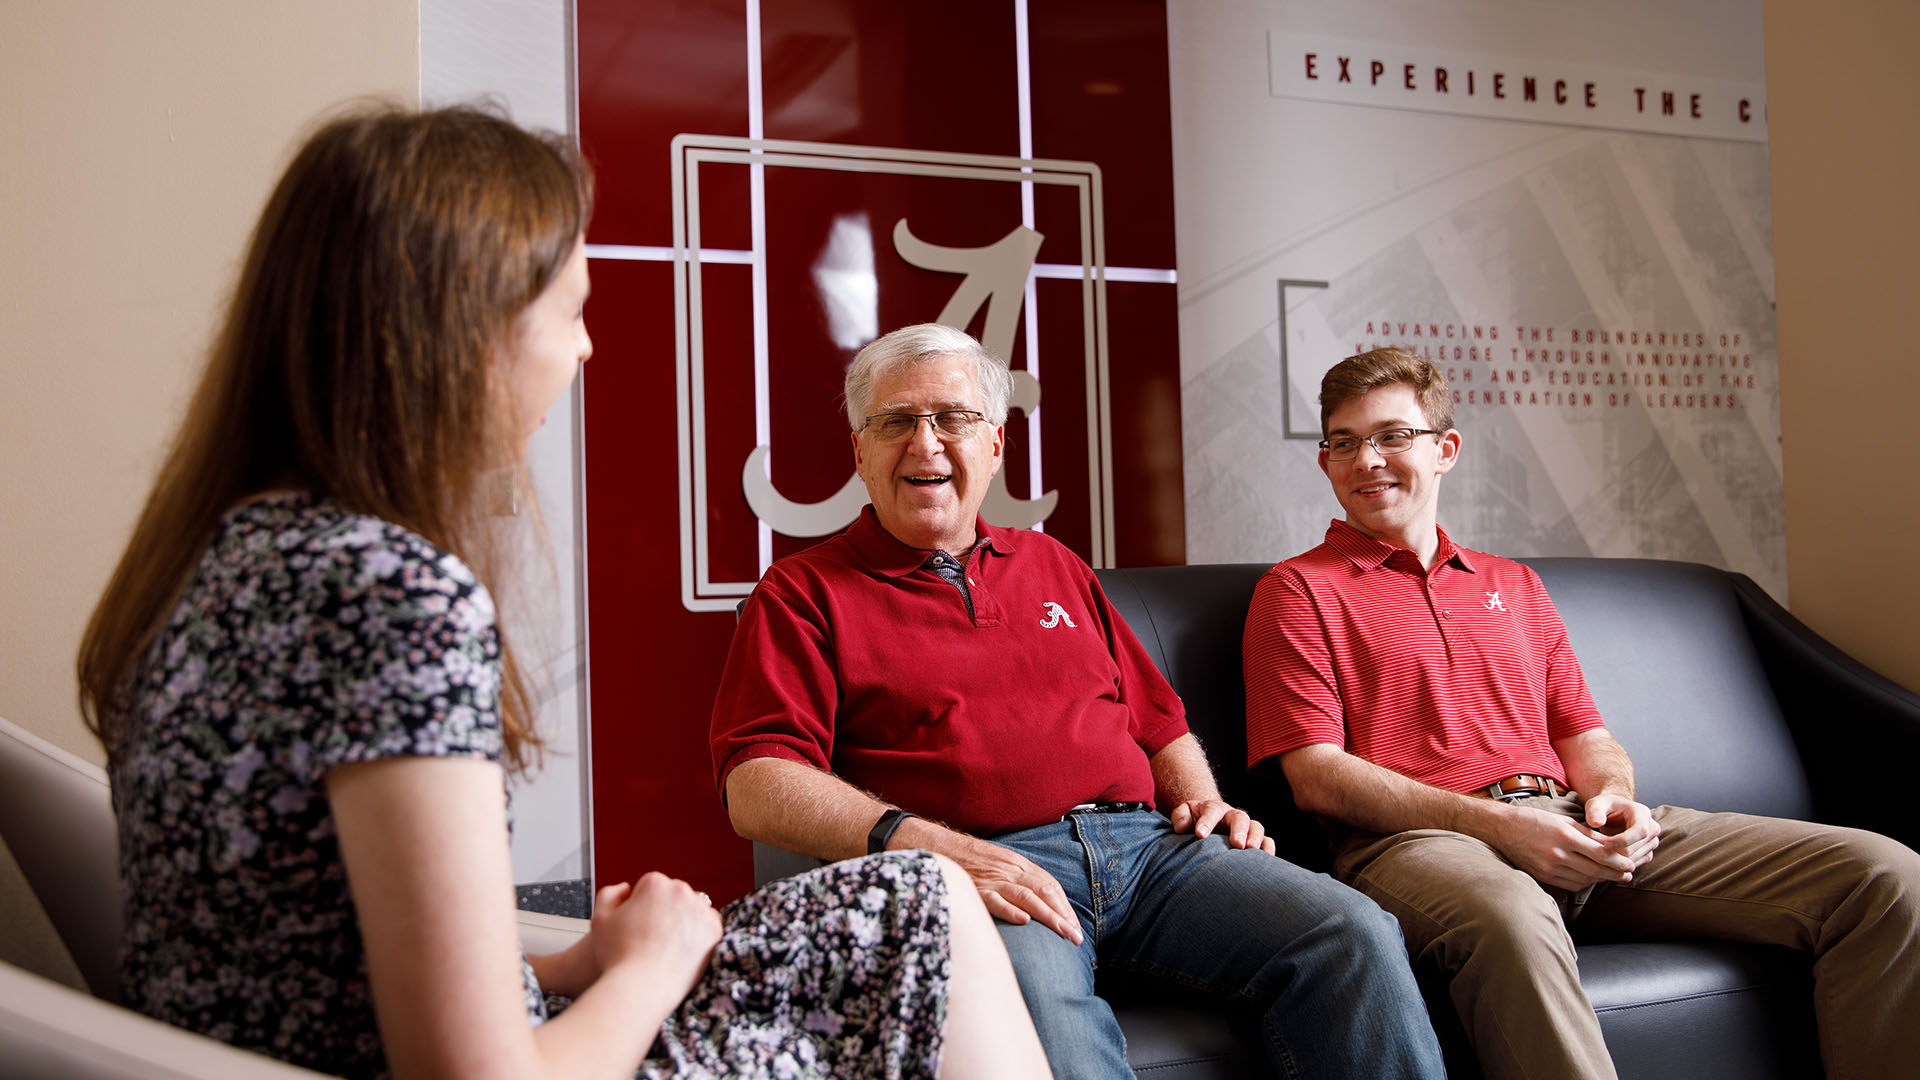 Bob Brazeal and 2 students sit chatting in a room with the UA logo on the back wall